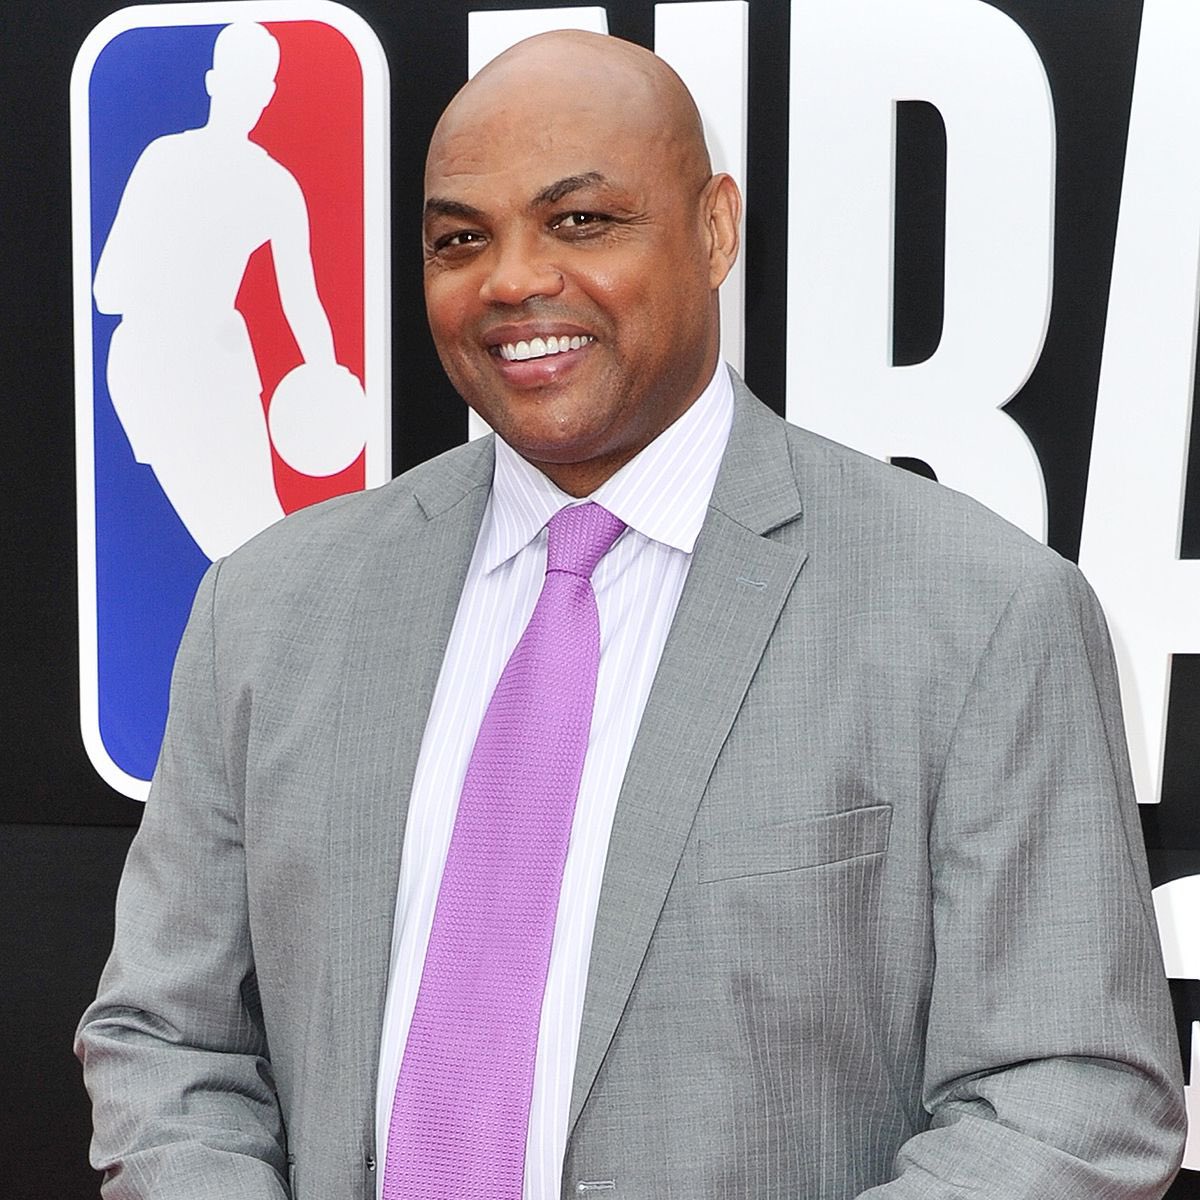 Charles Barkley has agreed to a 10-year deal with TNT that could reach up to $200M, per @AndrewMarchand